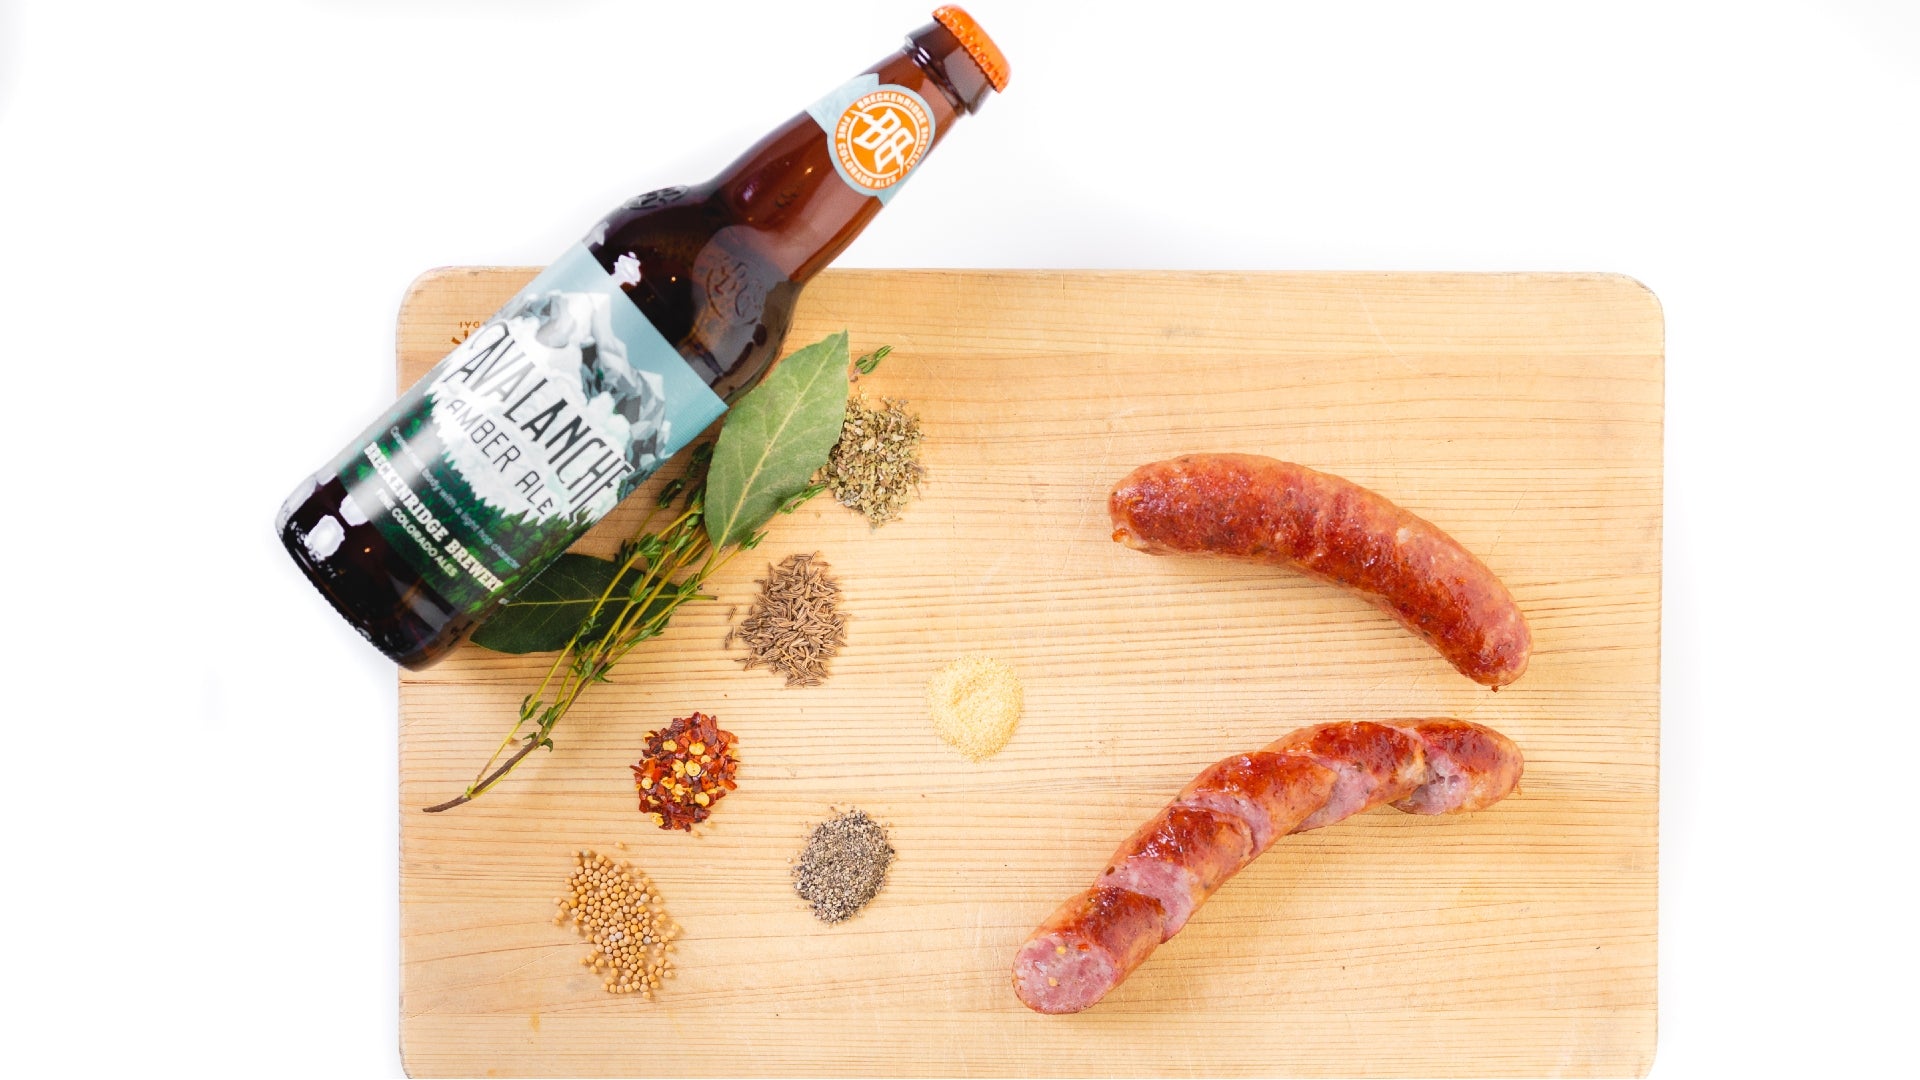 A picture shot from above of an Avalanche smoked cheddar bratwurst on a cutting board with herbs, spices and the Breckenridge Avalanche beer.